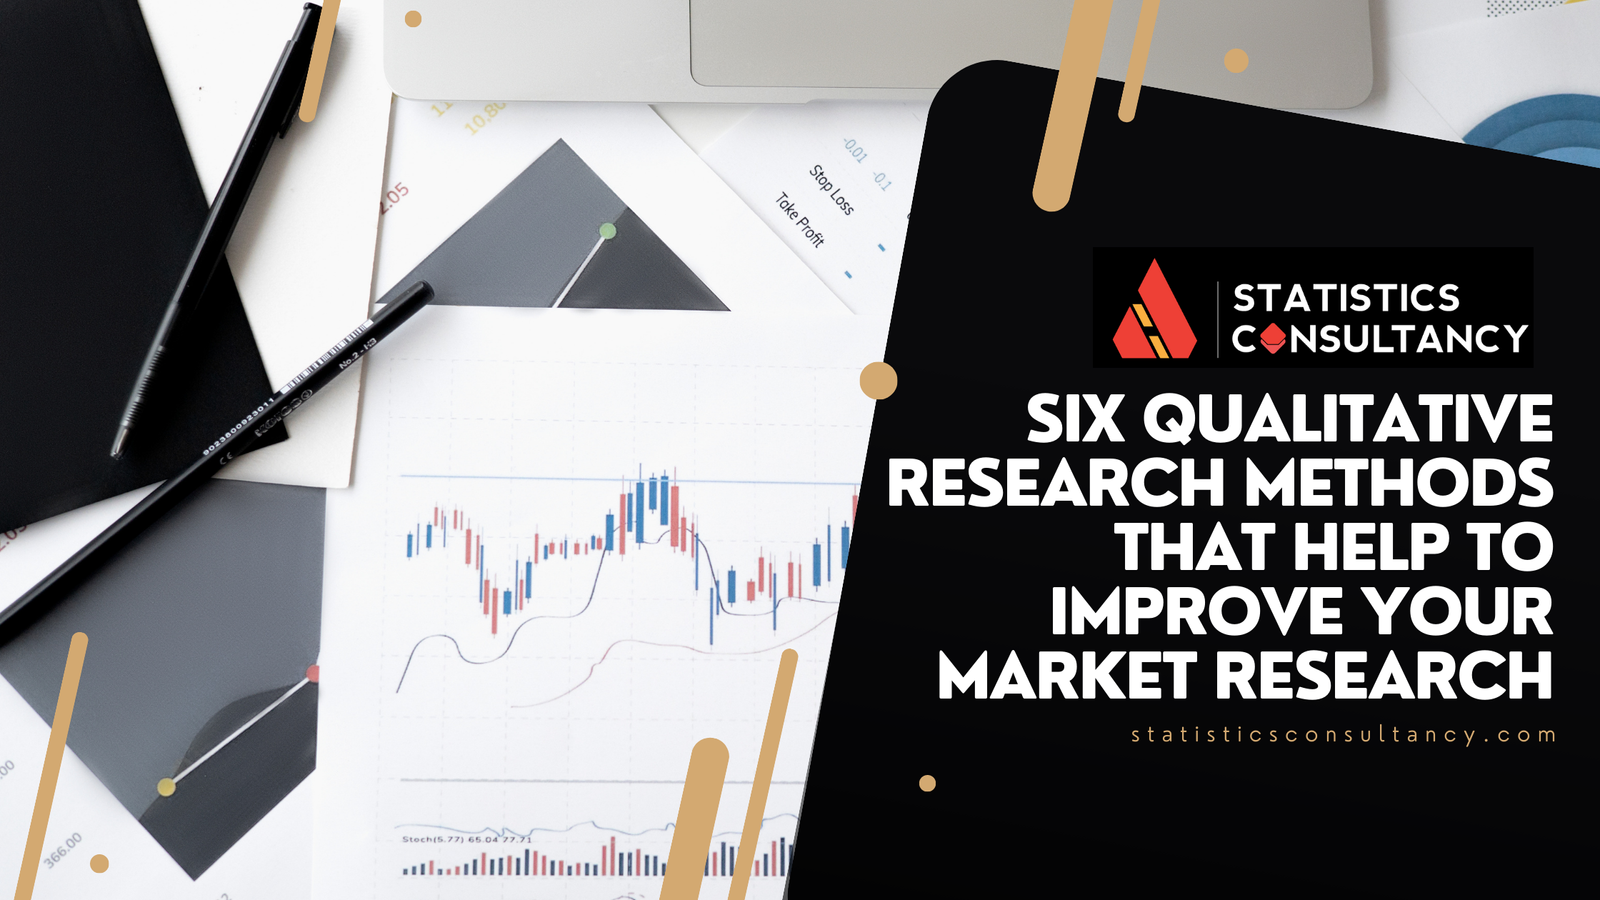 Six Qualitative Research Methods that help to improve Your Market Research